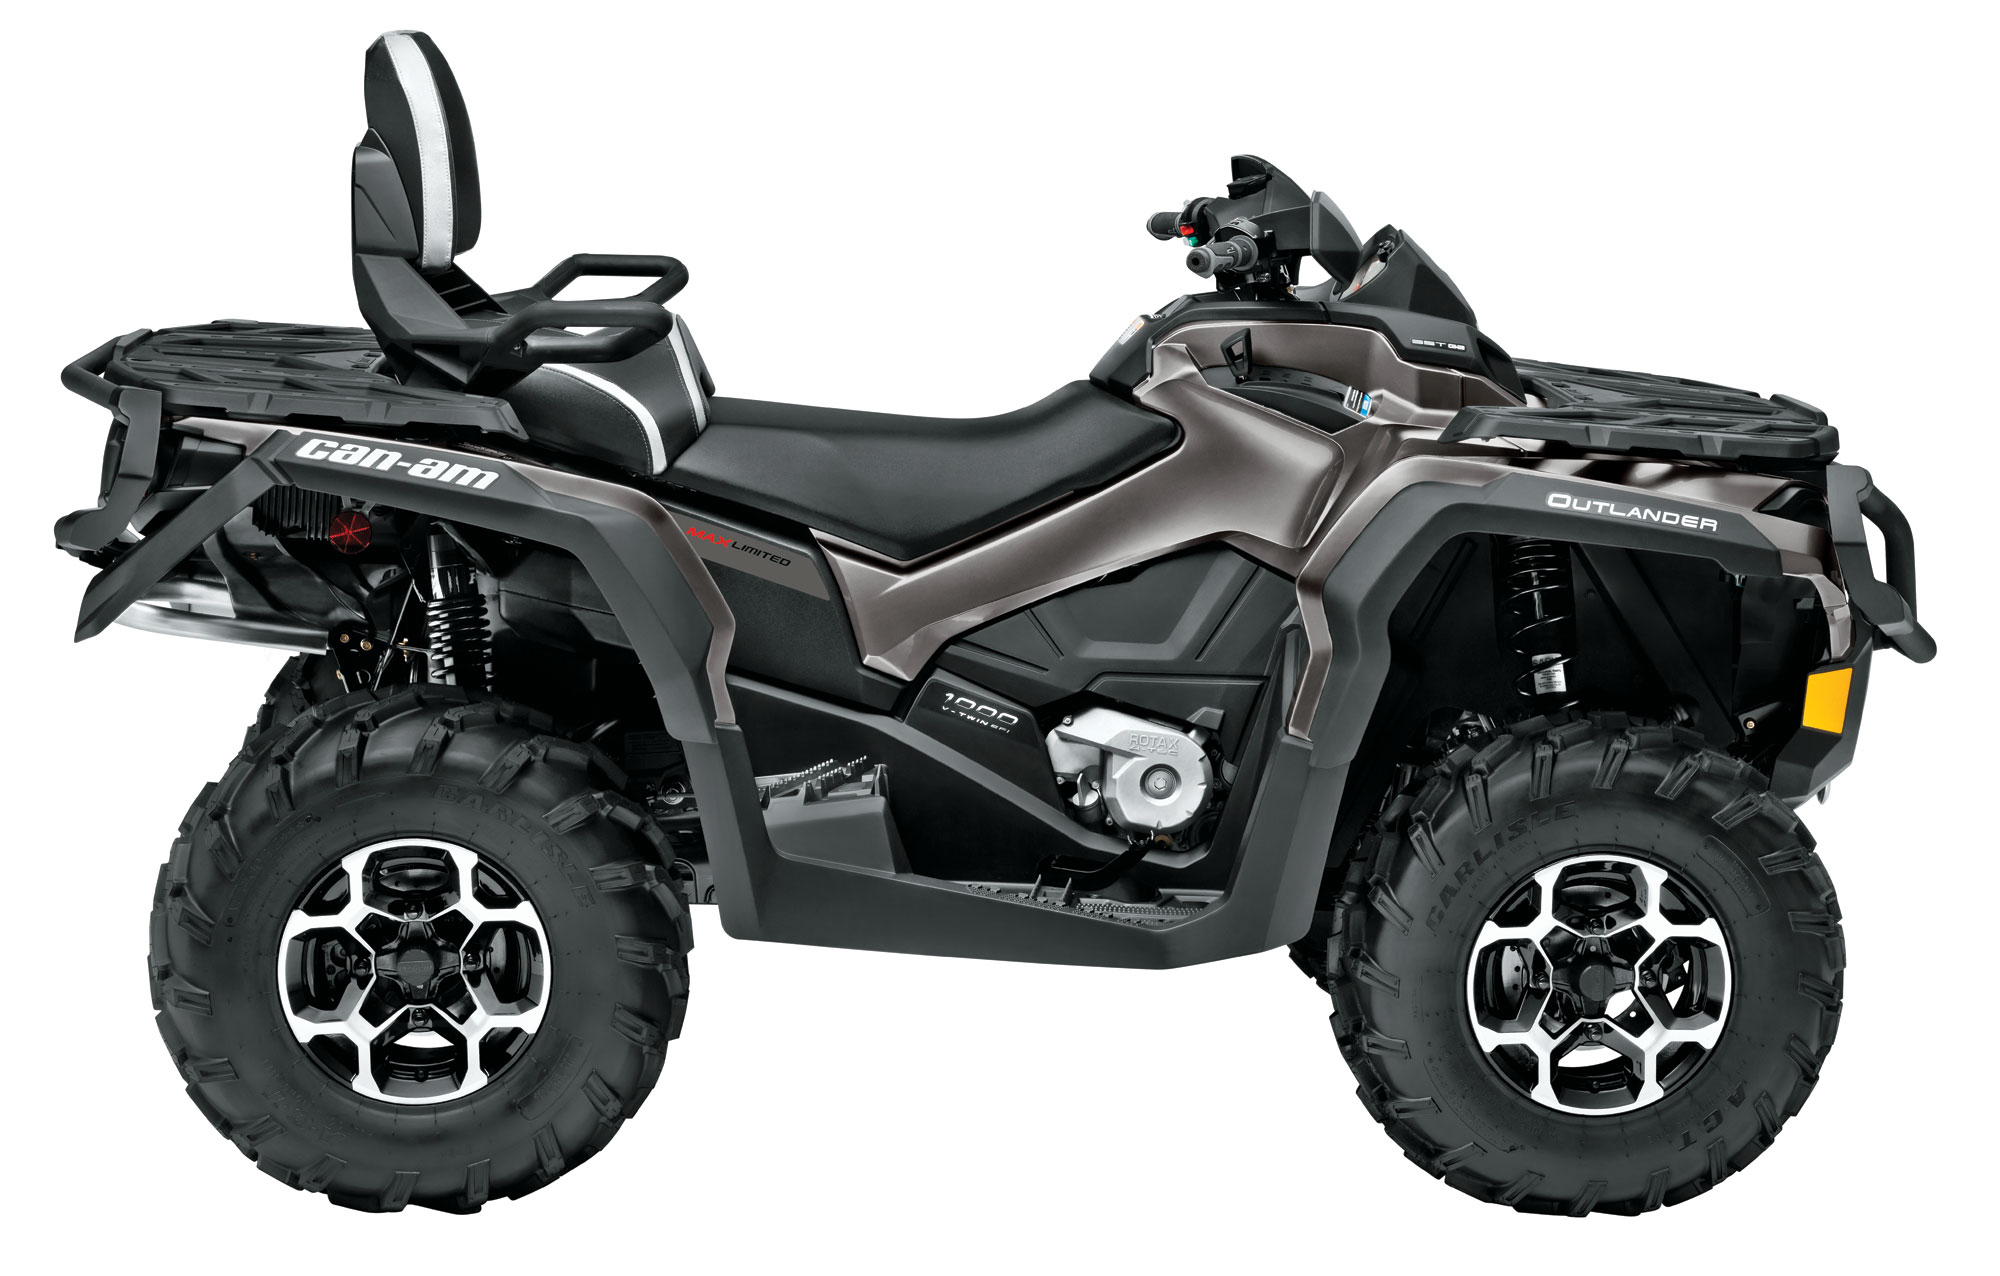 2013 Can-Am Outlander MAX LIMITED 1000 Review